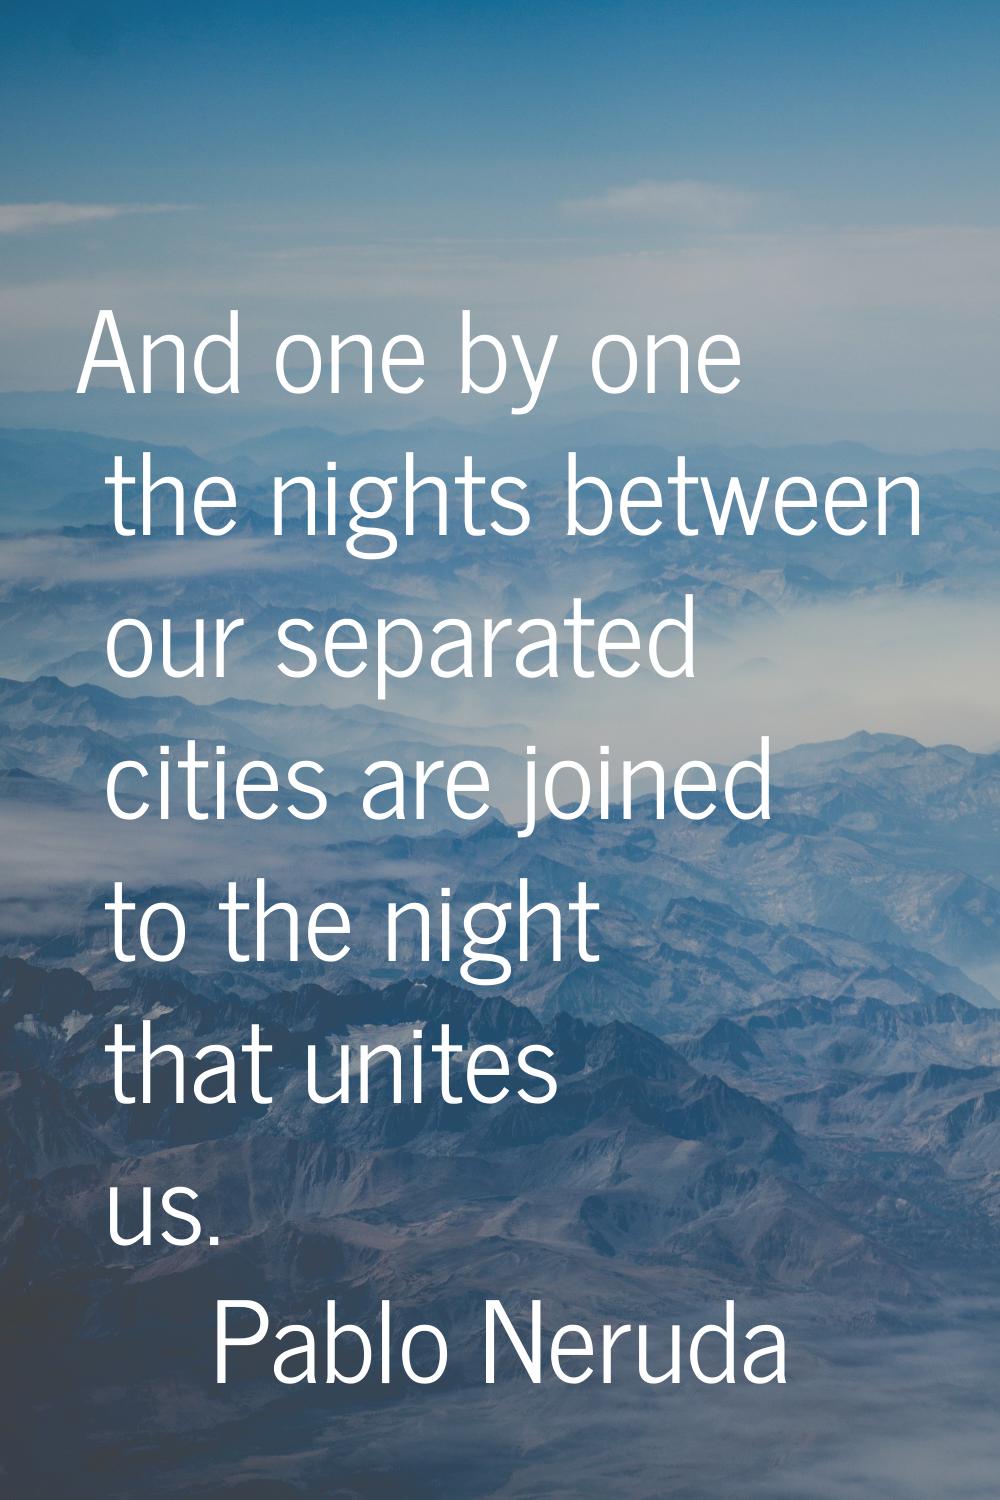 And one by one the nights between our separated cities are joined to the night that unites us.